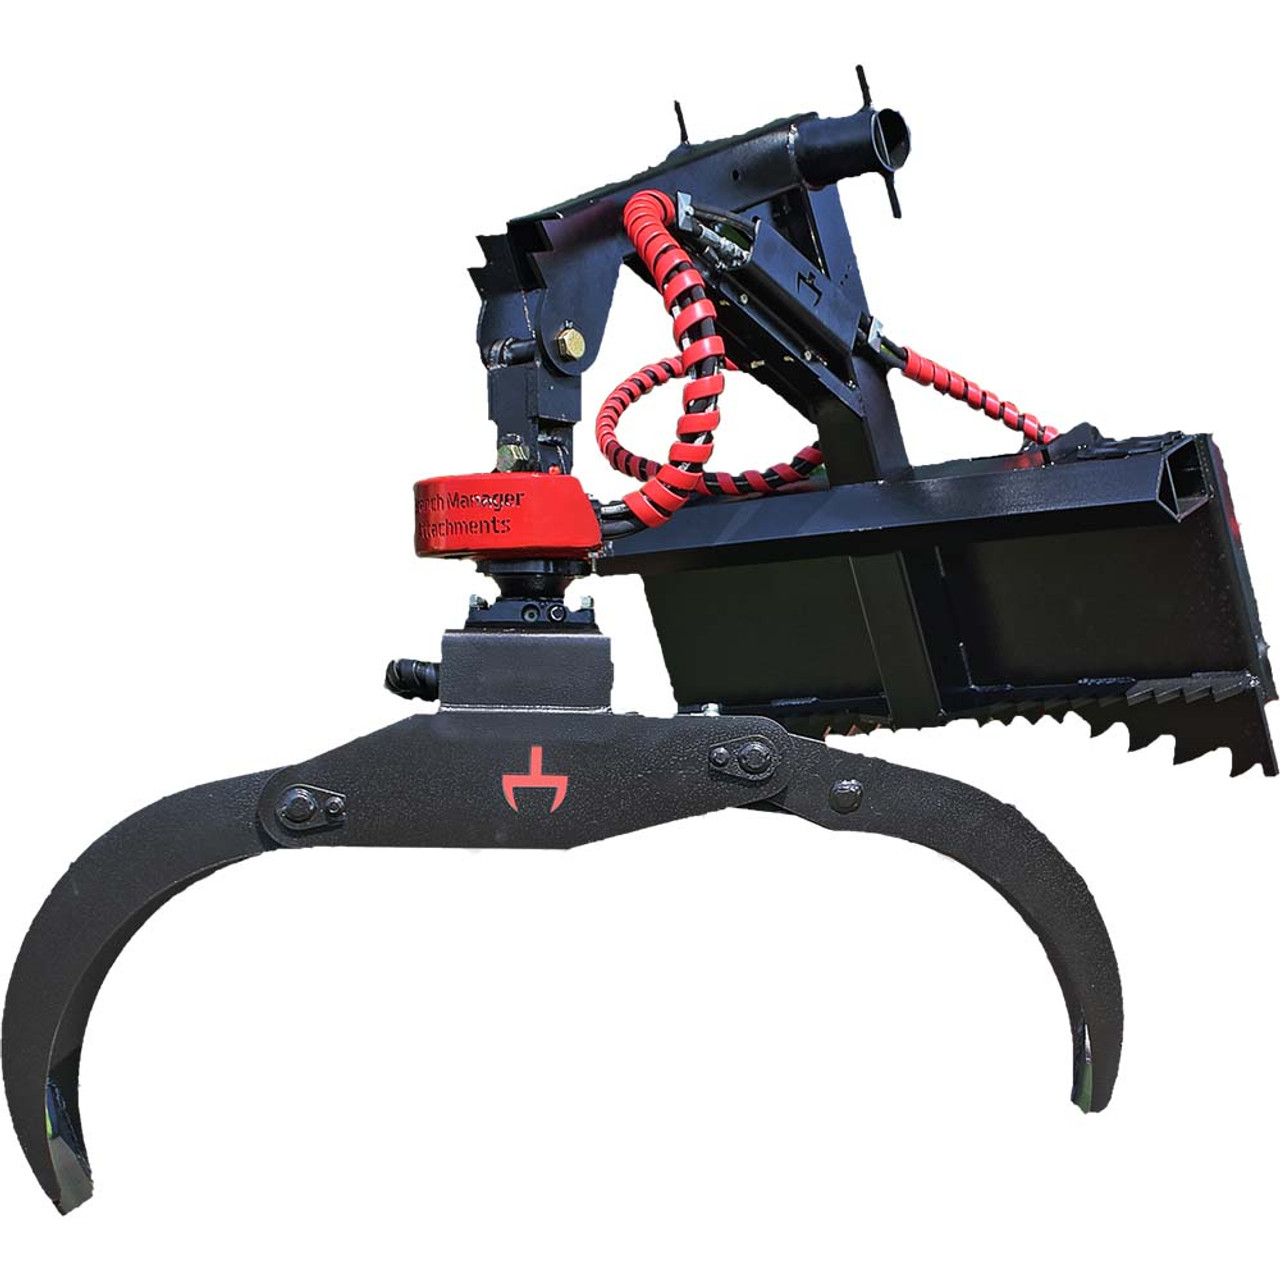 https://cdn11.bigcommerce.com/s-f2blb58h/images/stencil/1280x1280/products/5654/19158/branch-manager-t4010-skid-steer-hardox-power-rotating-log-grapple-attachment-white__97513.1685127917.jpg?c=2